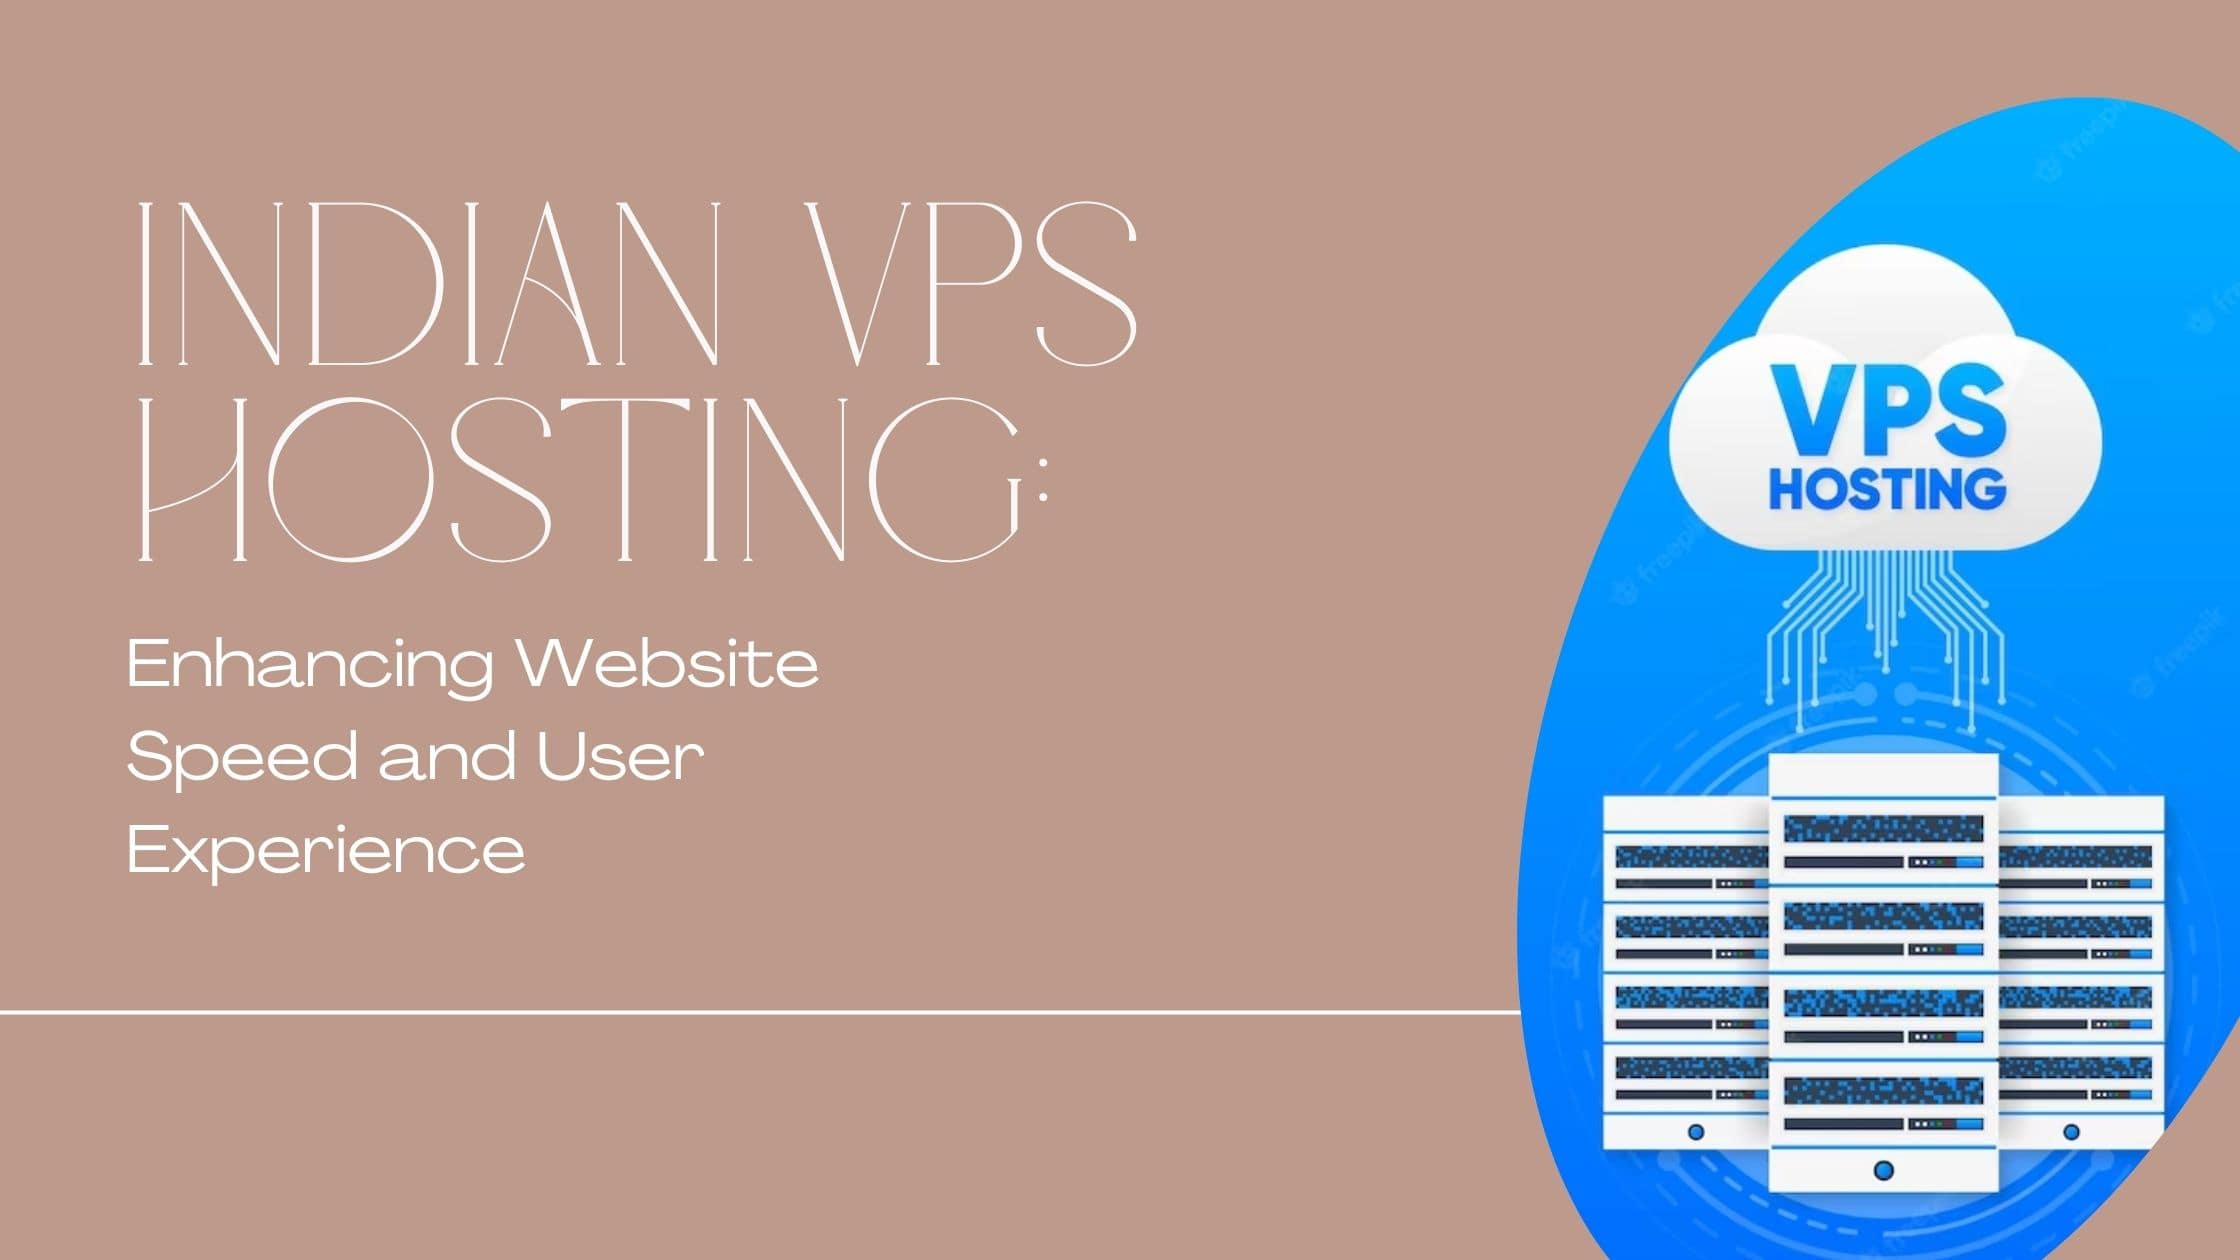 Indian VPS Hosting: Enhancing Website Speed and User Experience